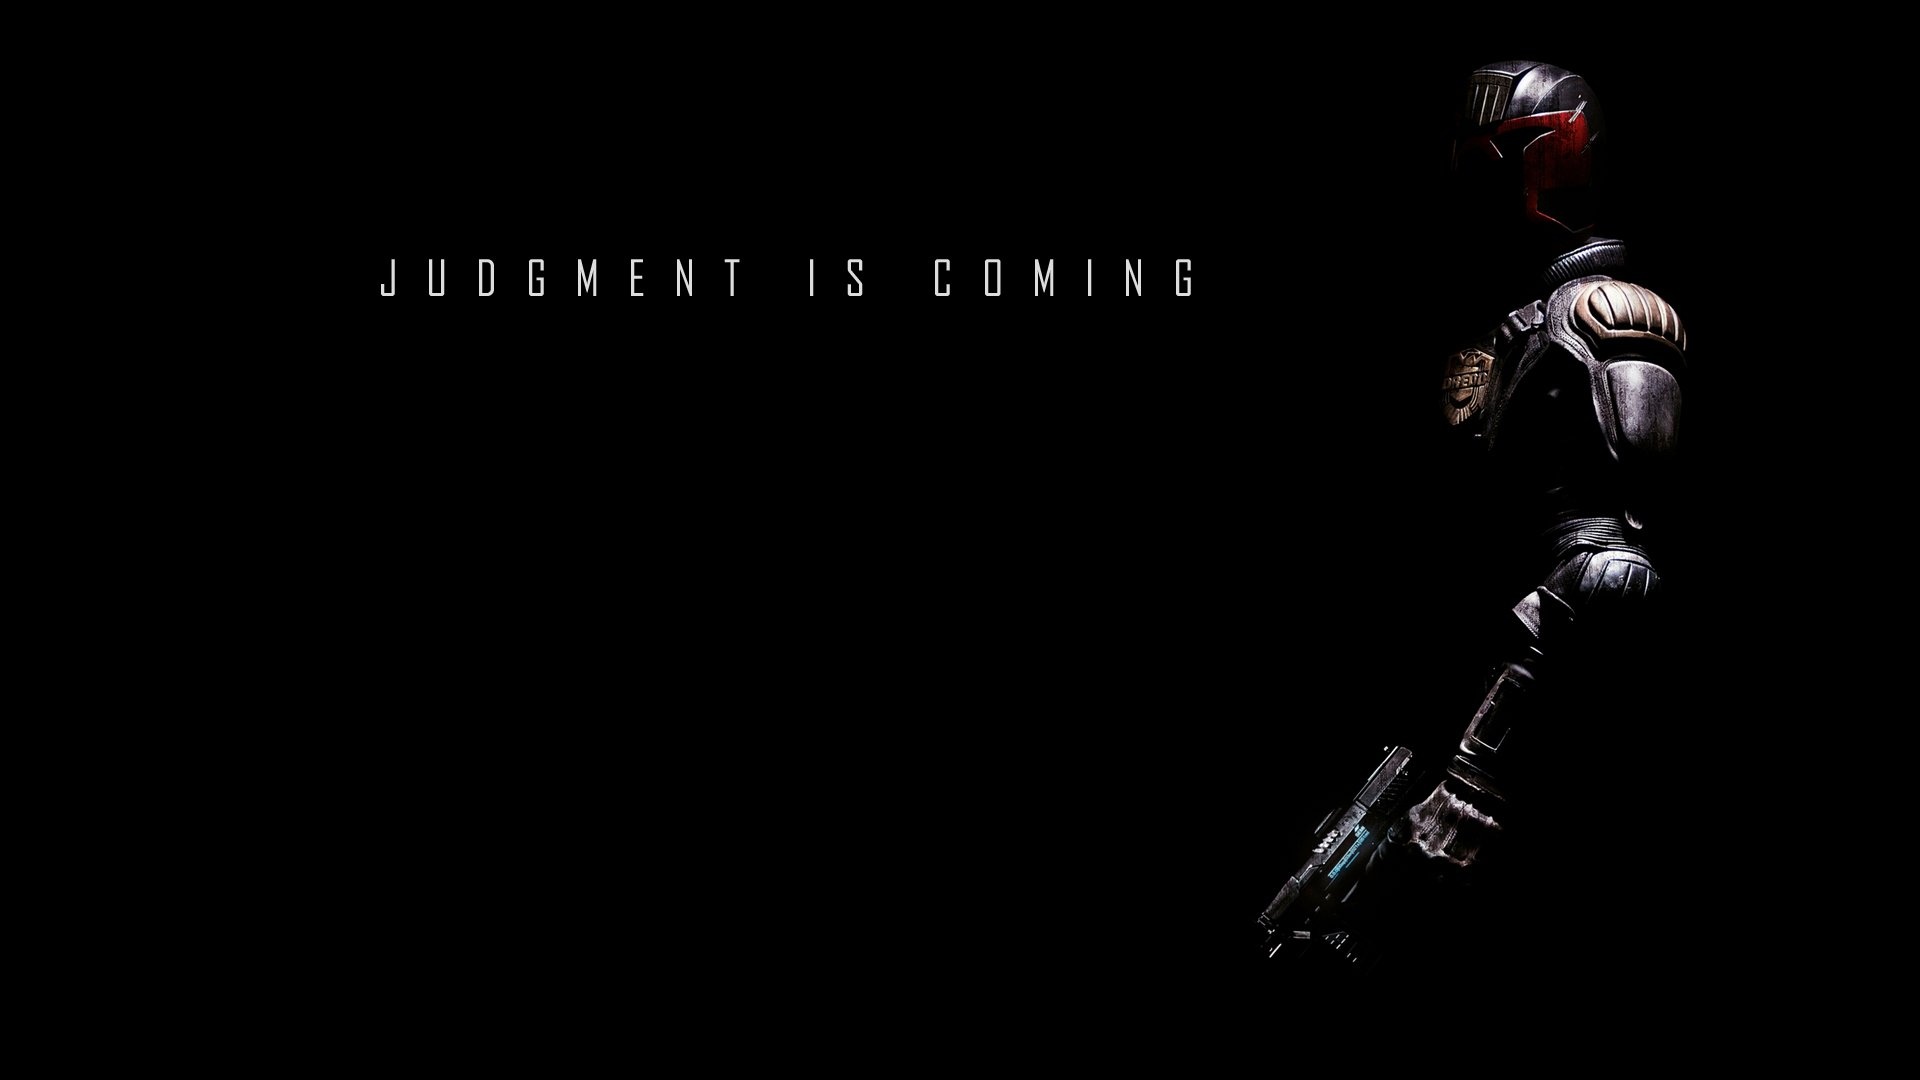 Dredd: The titular main protagonist/anti-hero from the sci-fi comic, Lethal Enforcer. 1920x1080 Full HD Background.